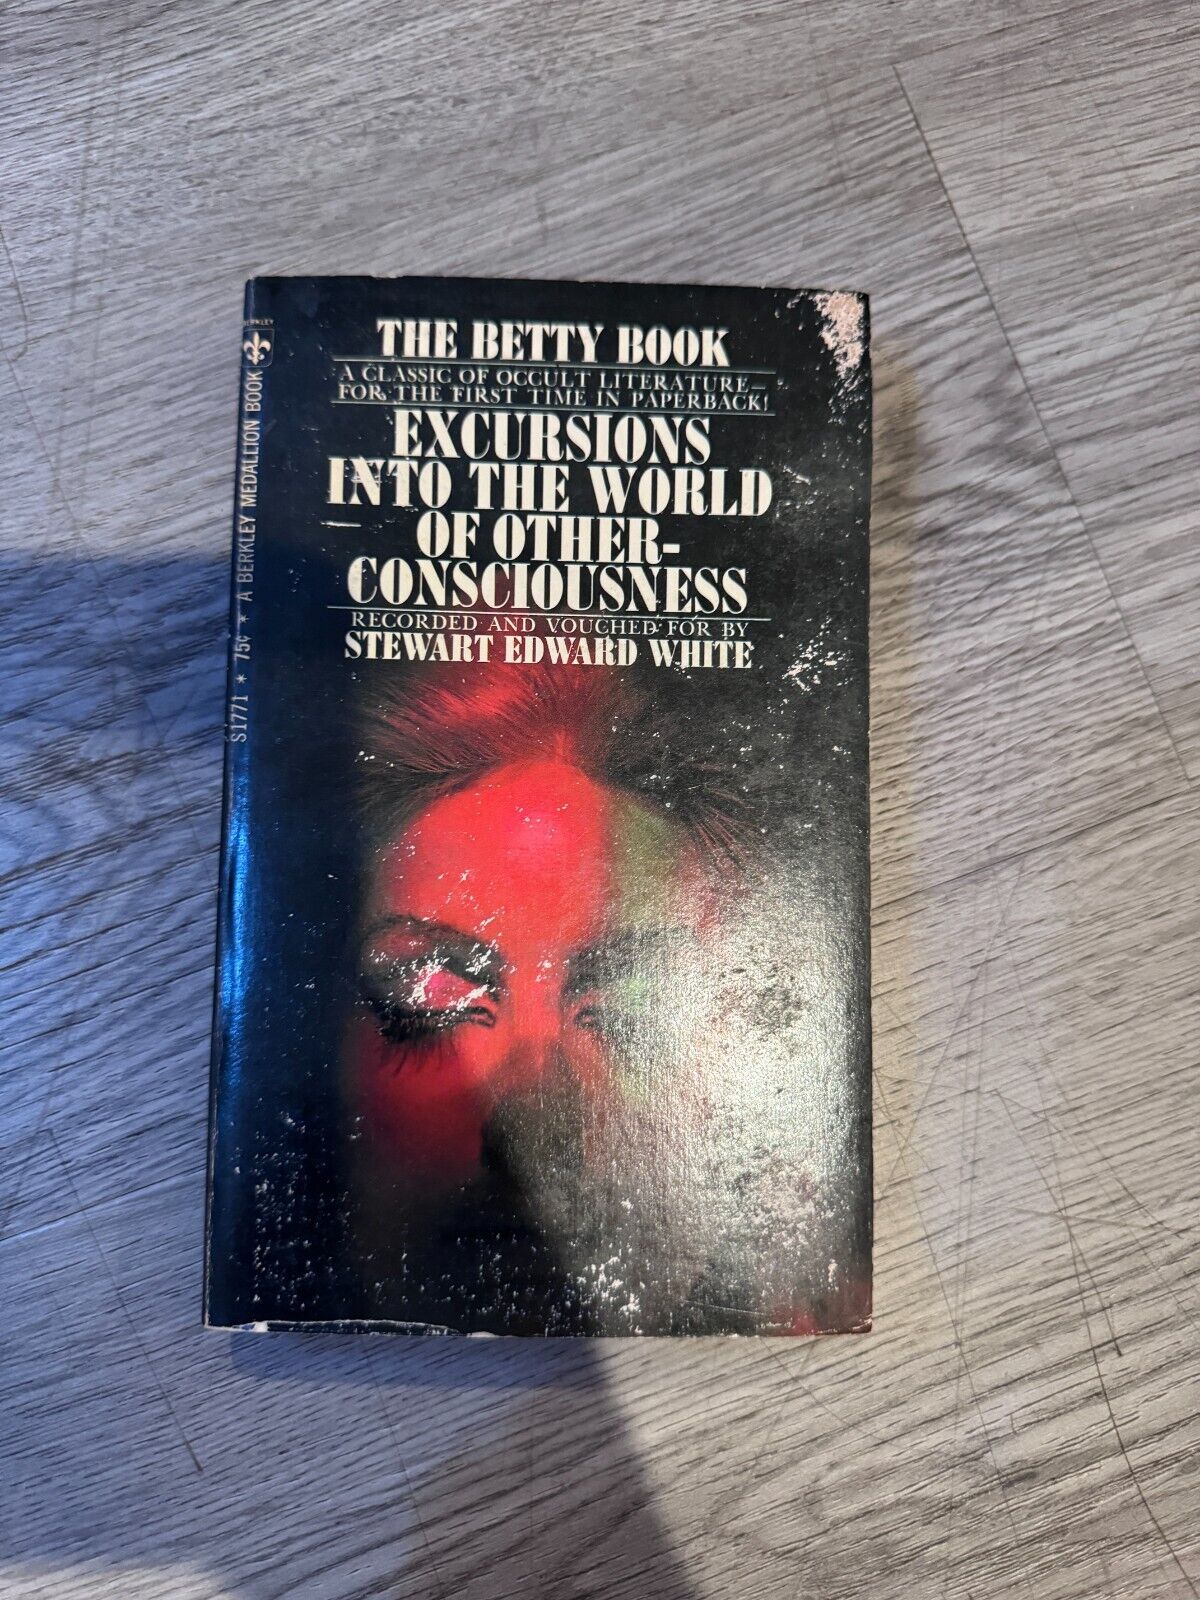 VINTAGE 1969 THE BETTY BOOK EXCURSIONS INTO THE WORLD CONSCIOUS PAPERBACK BOOK